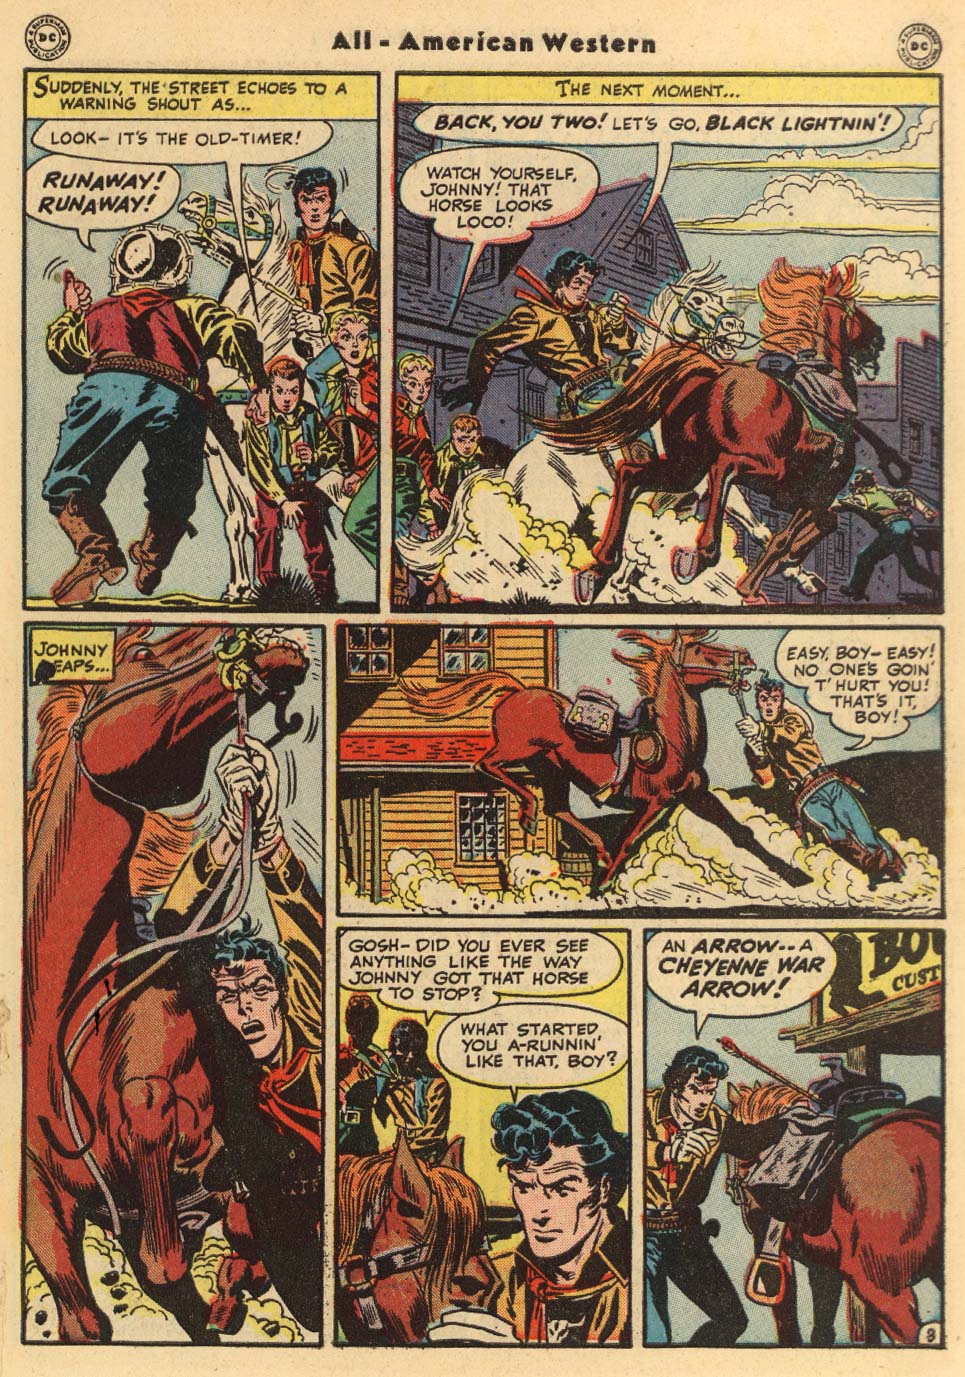 Read online All-American Western comic -  Issue #107 - 5